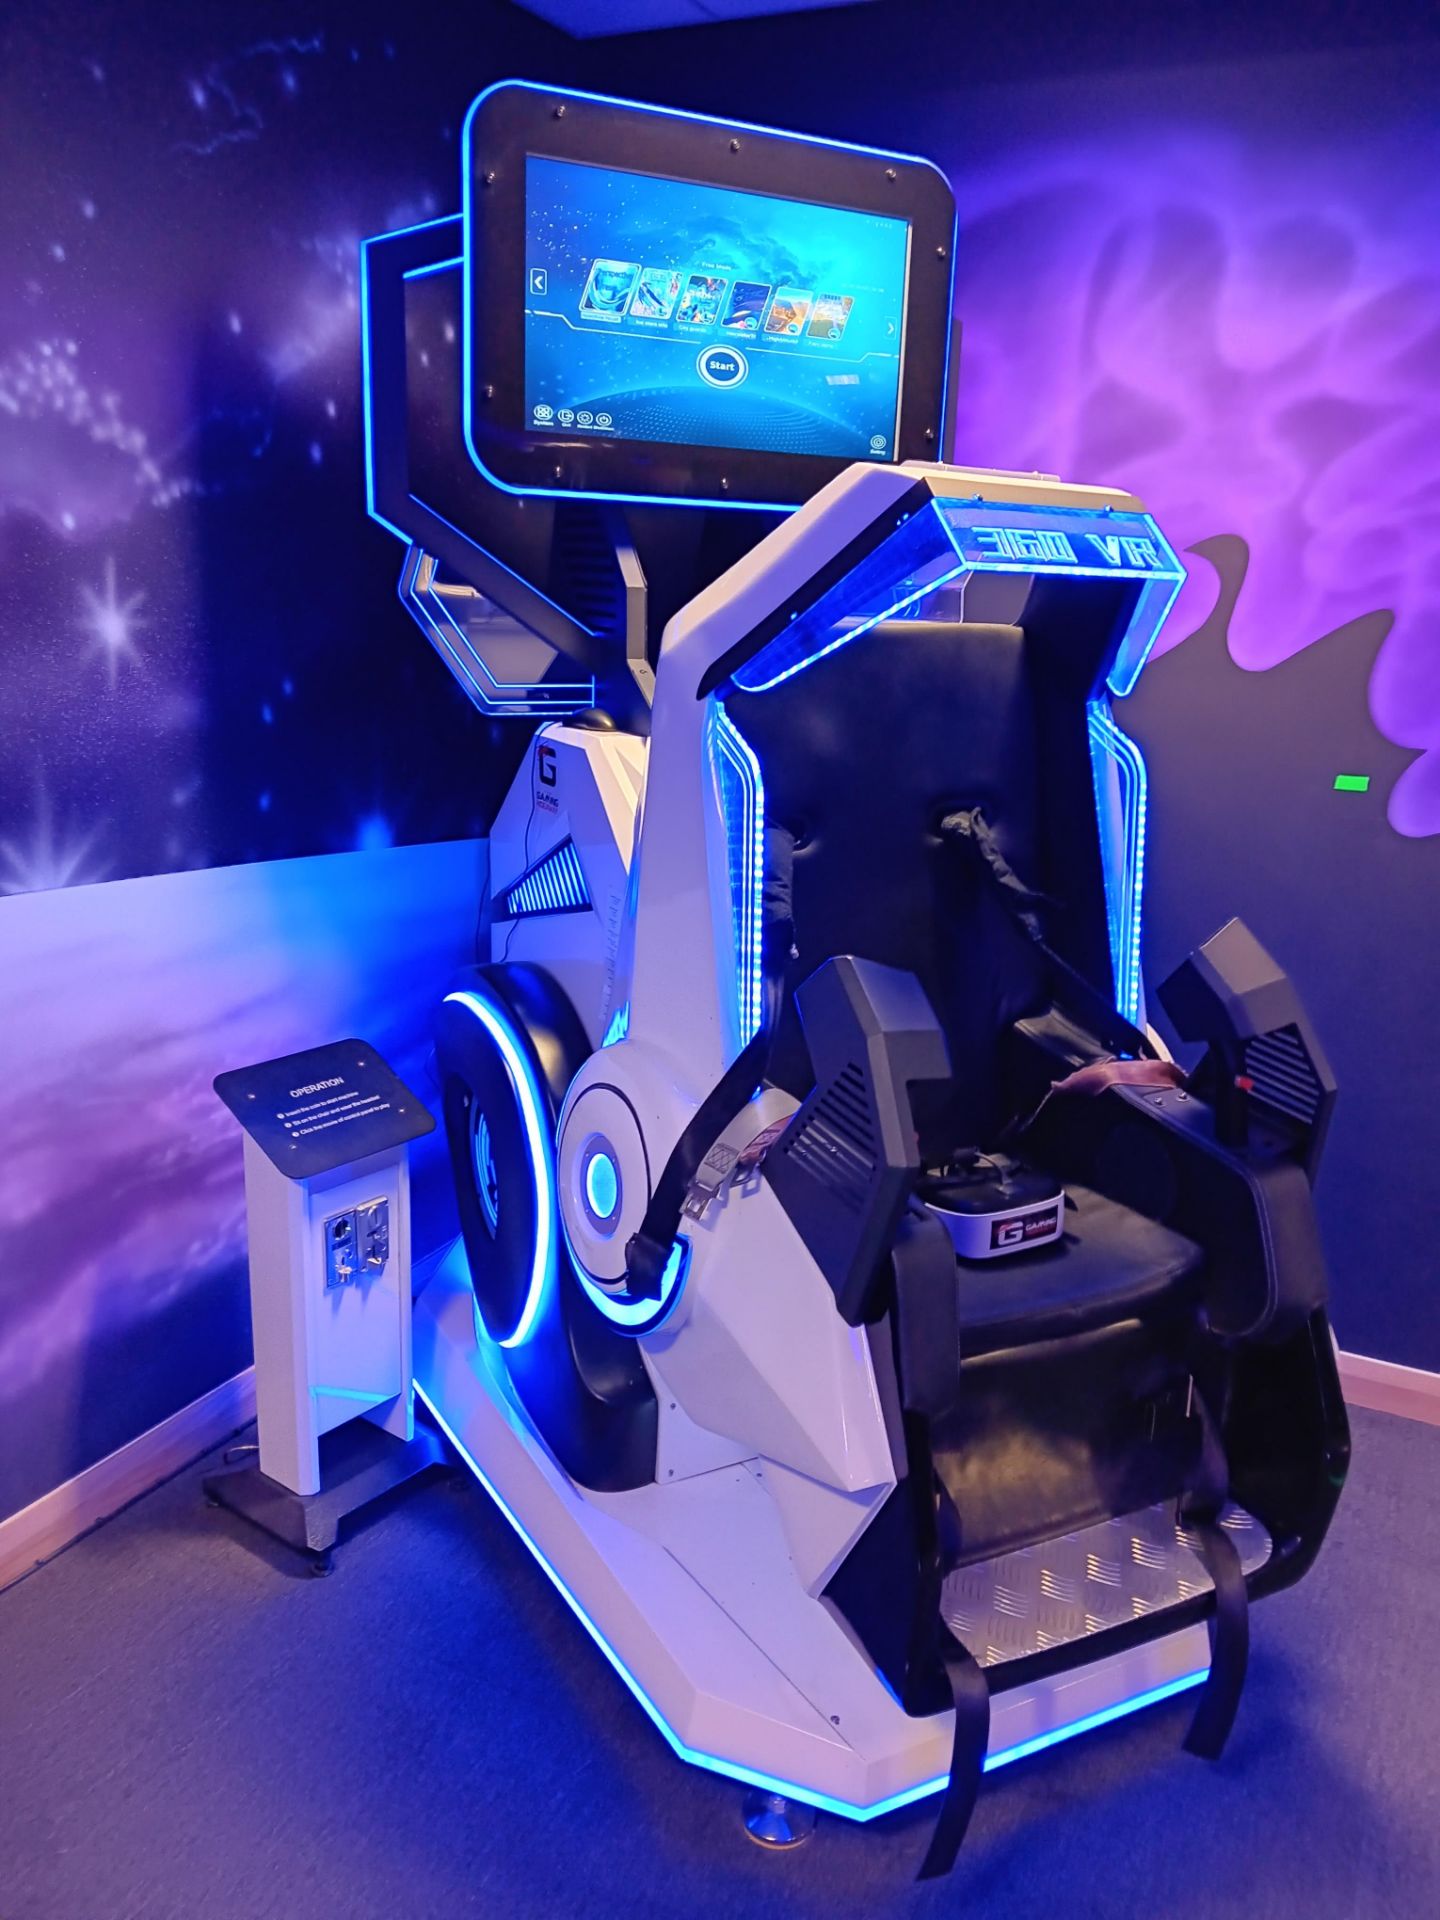 Owatch 360 Degree Rotating VR Chair Roller Coaster Simulator – Cost New £14,400 – Buyer to